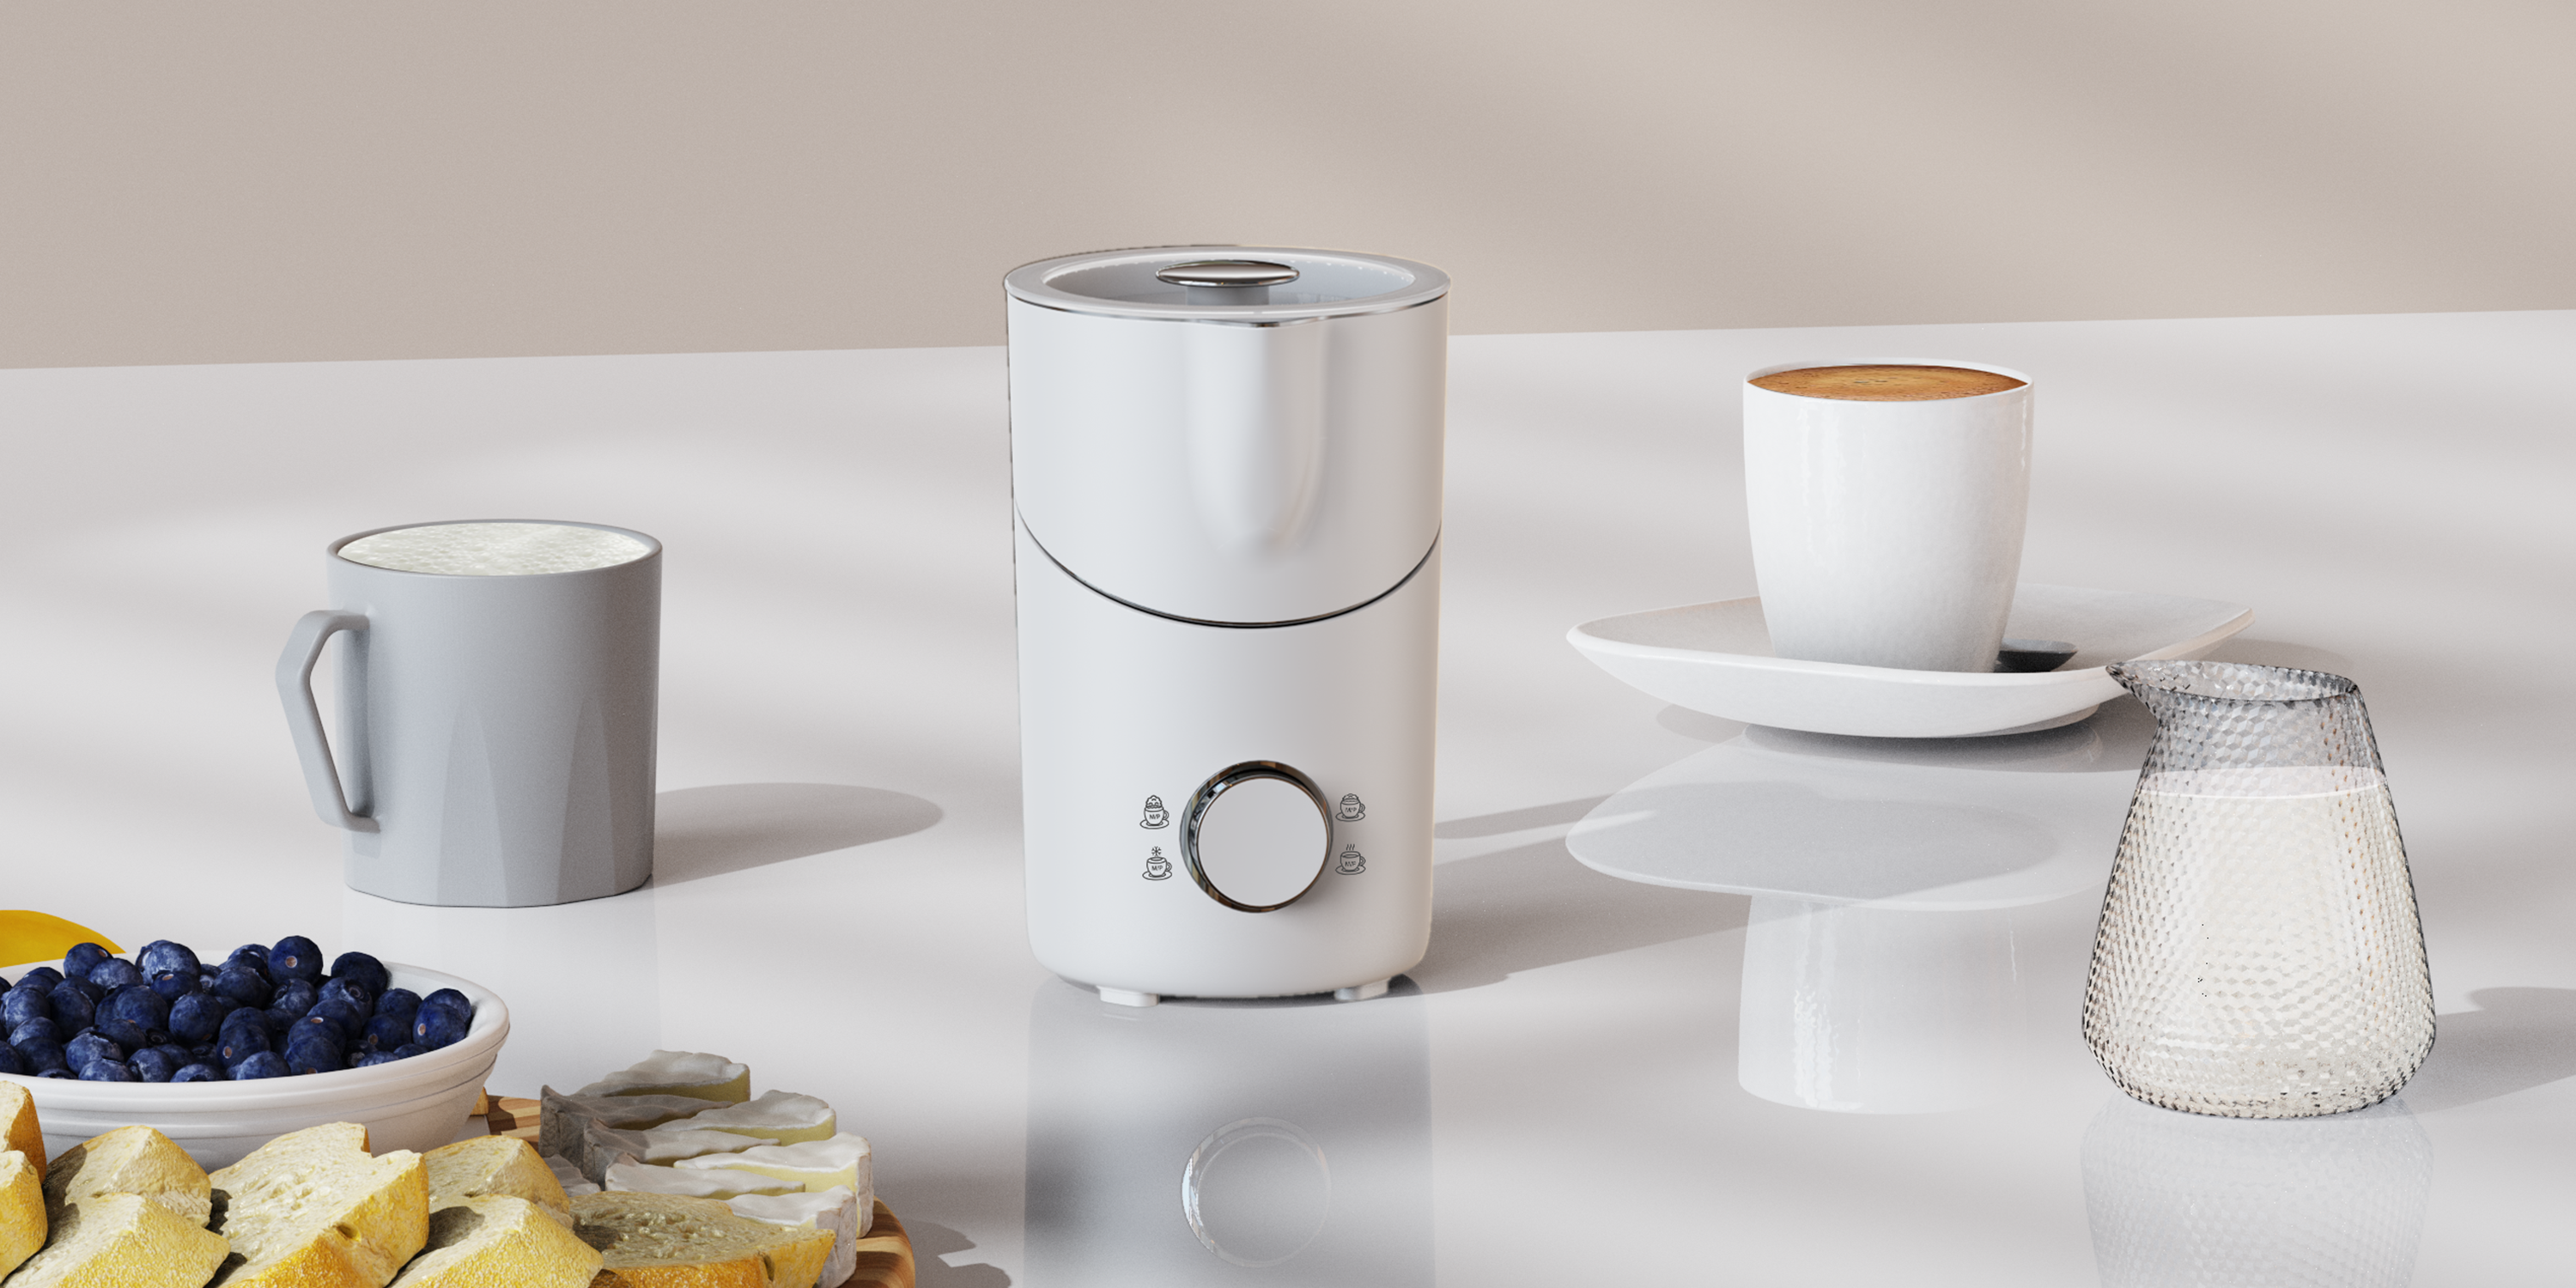 What inspired iTRUSOU to begin its journey in the kitchen appliance industry?